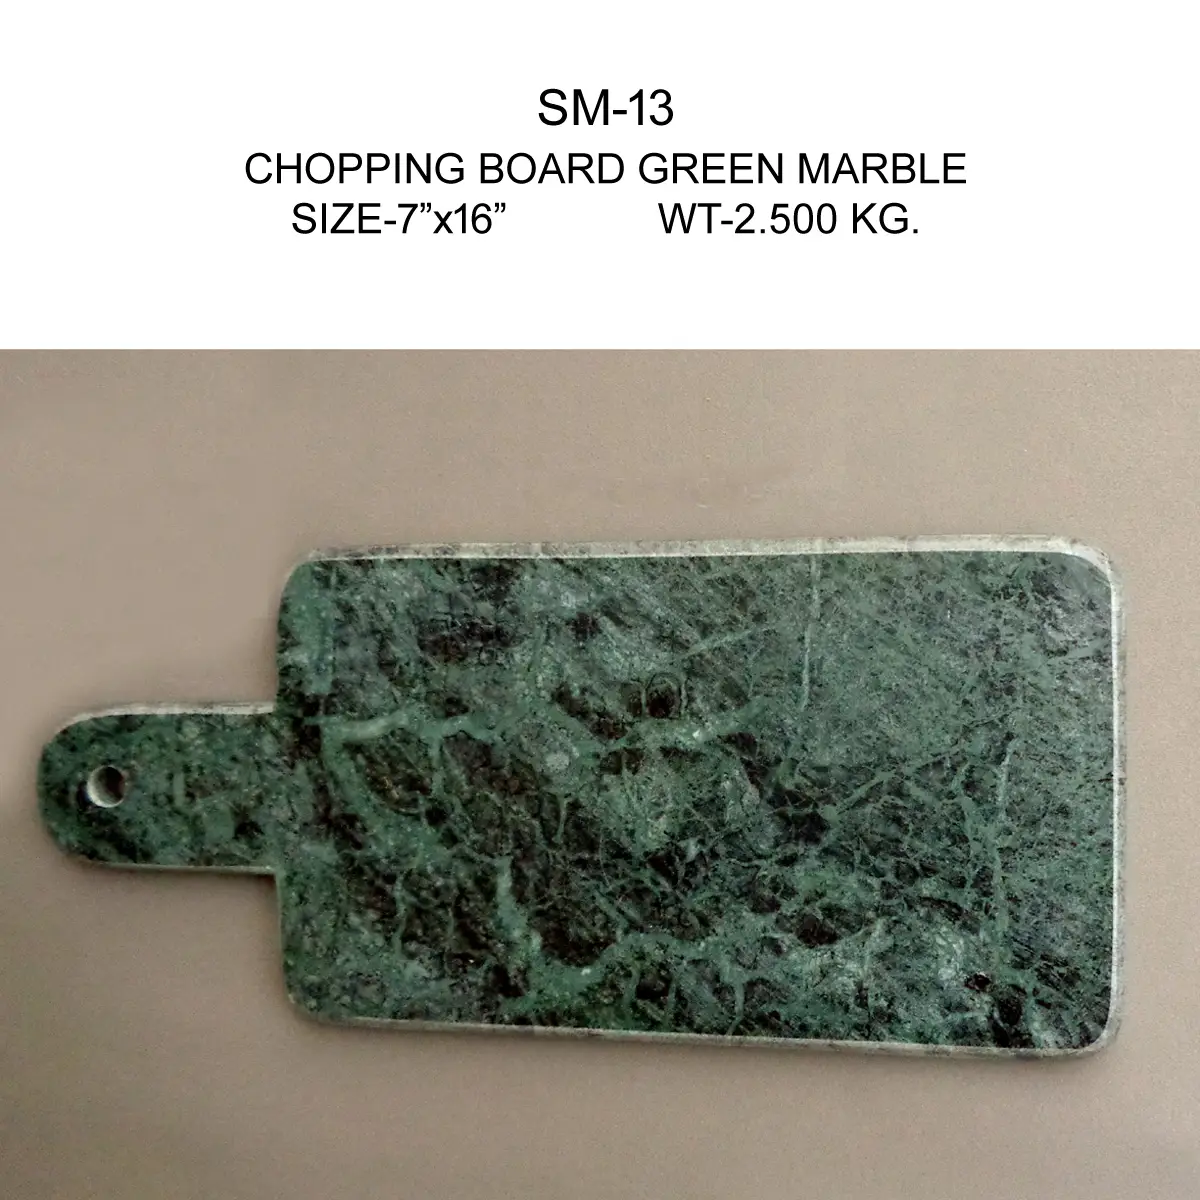 RACTANGLE GREEN MARBLE WITH HANDLE
CHOPPING BOARD WITH MOLDING